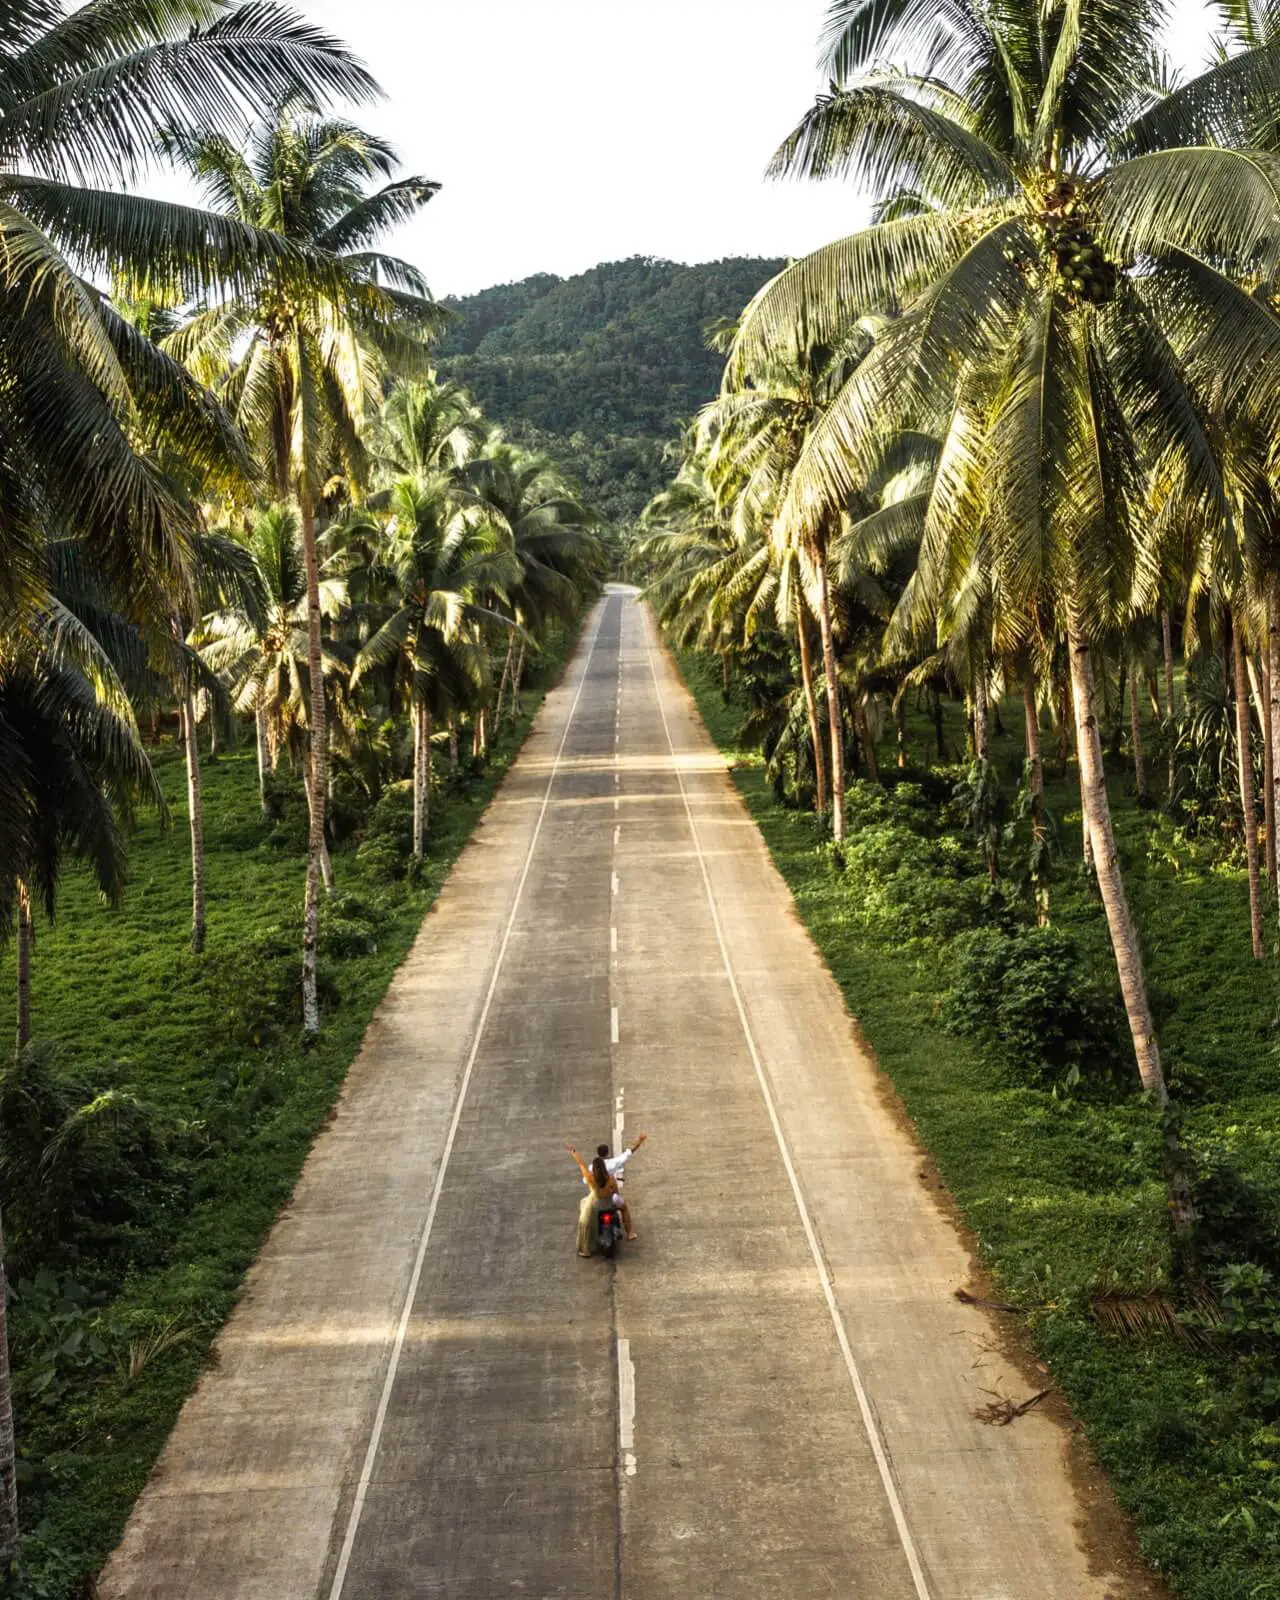 the Palm Tree Road, Siargao